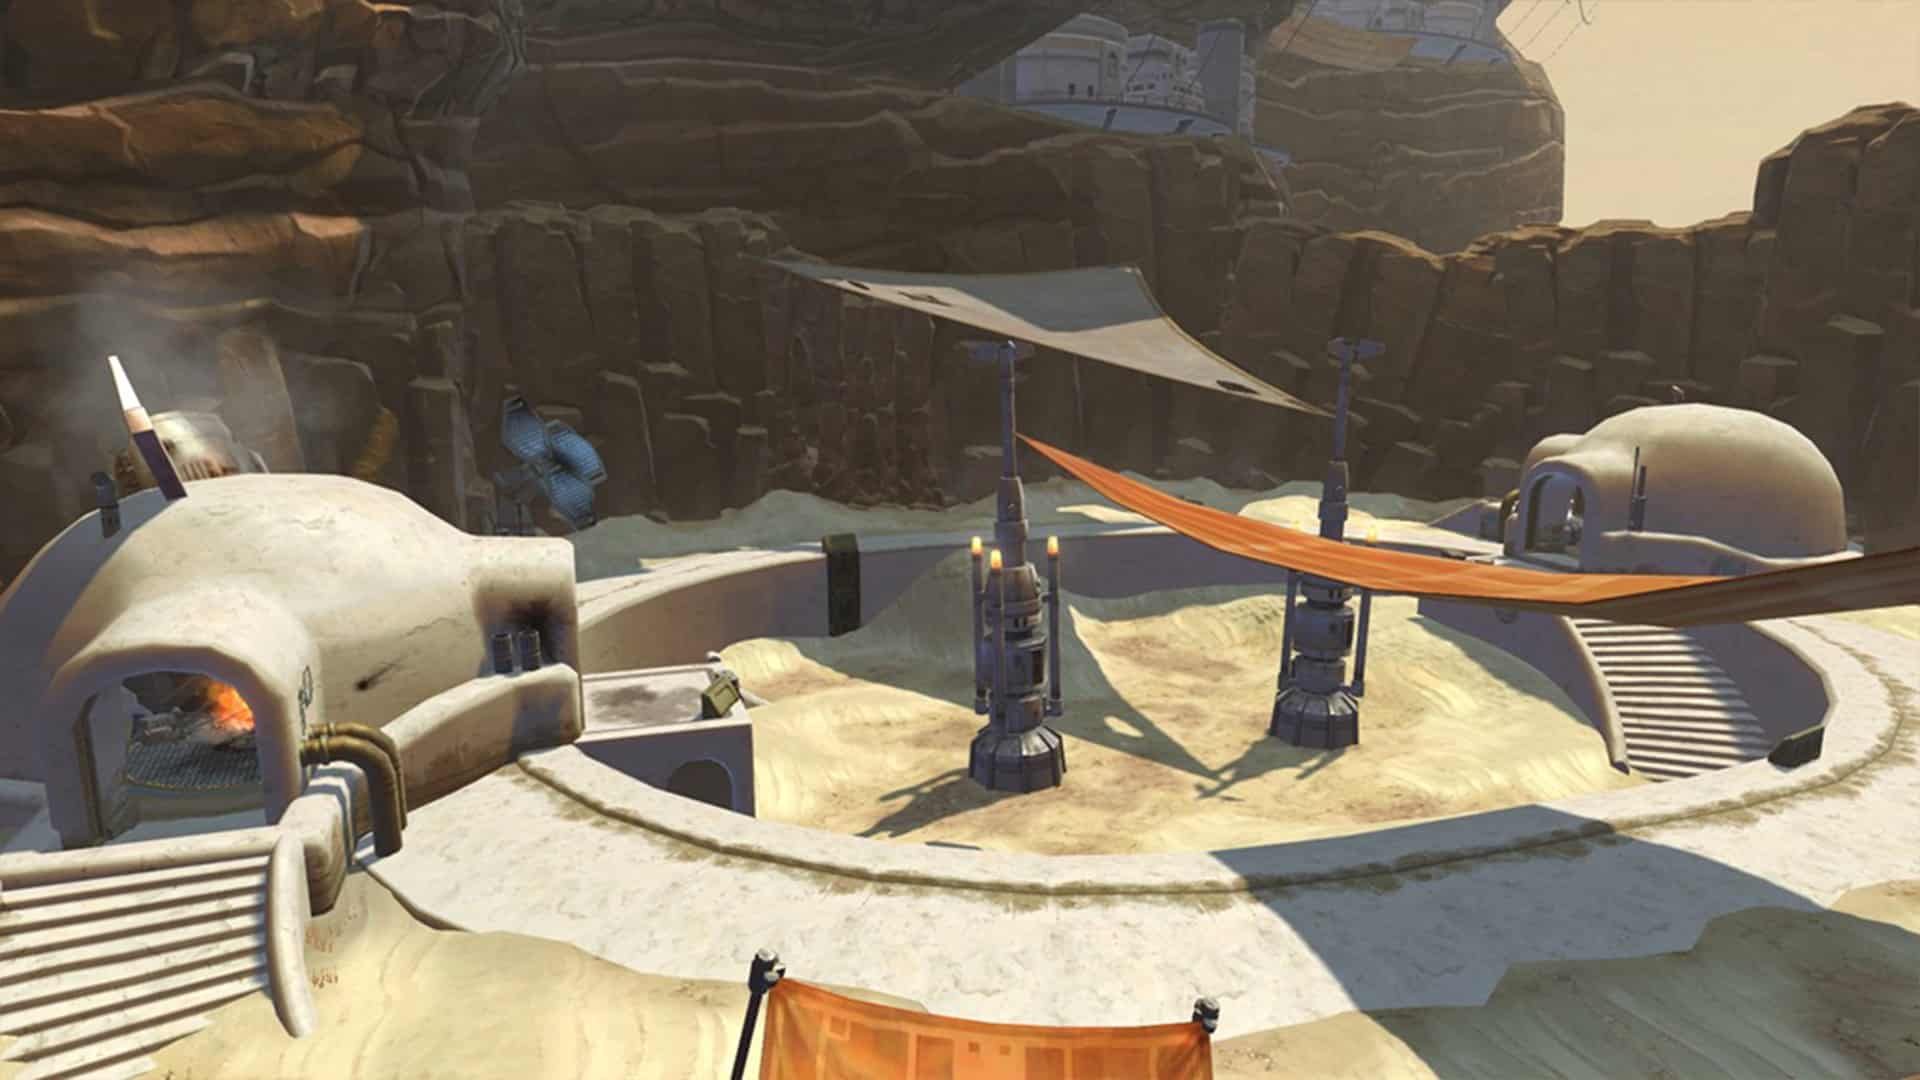 tatooine-arene-pvp-star-wars-the-old-republic-s-equiper-dans-l-extension-onslaught-swtor-guide-aide-astuce-2